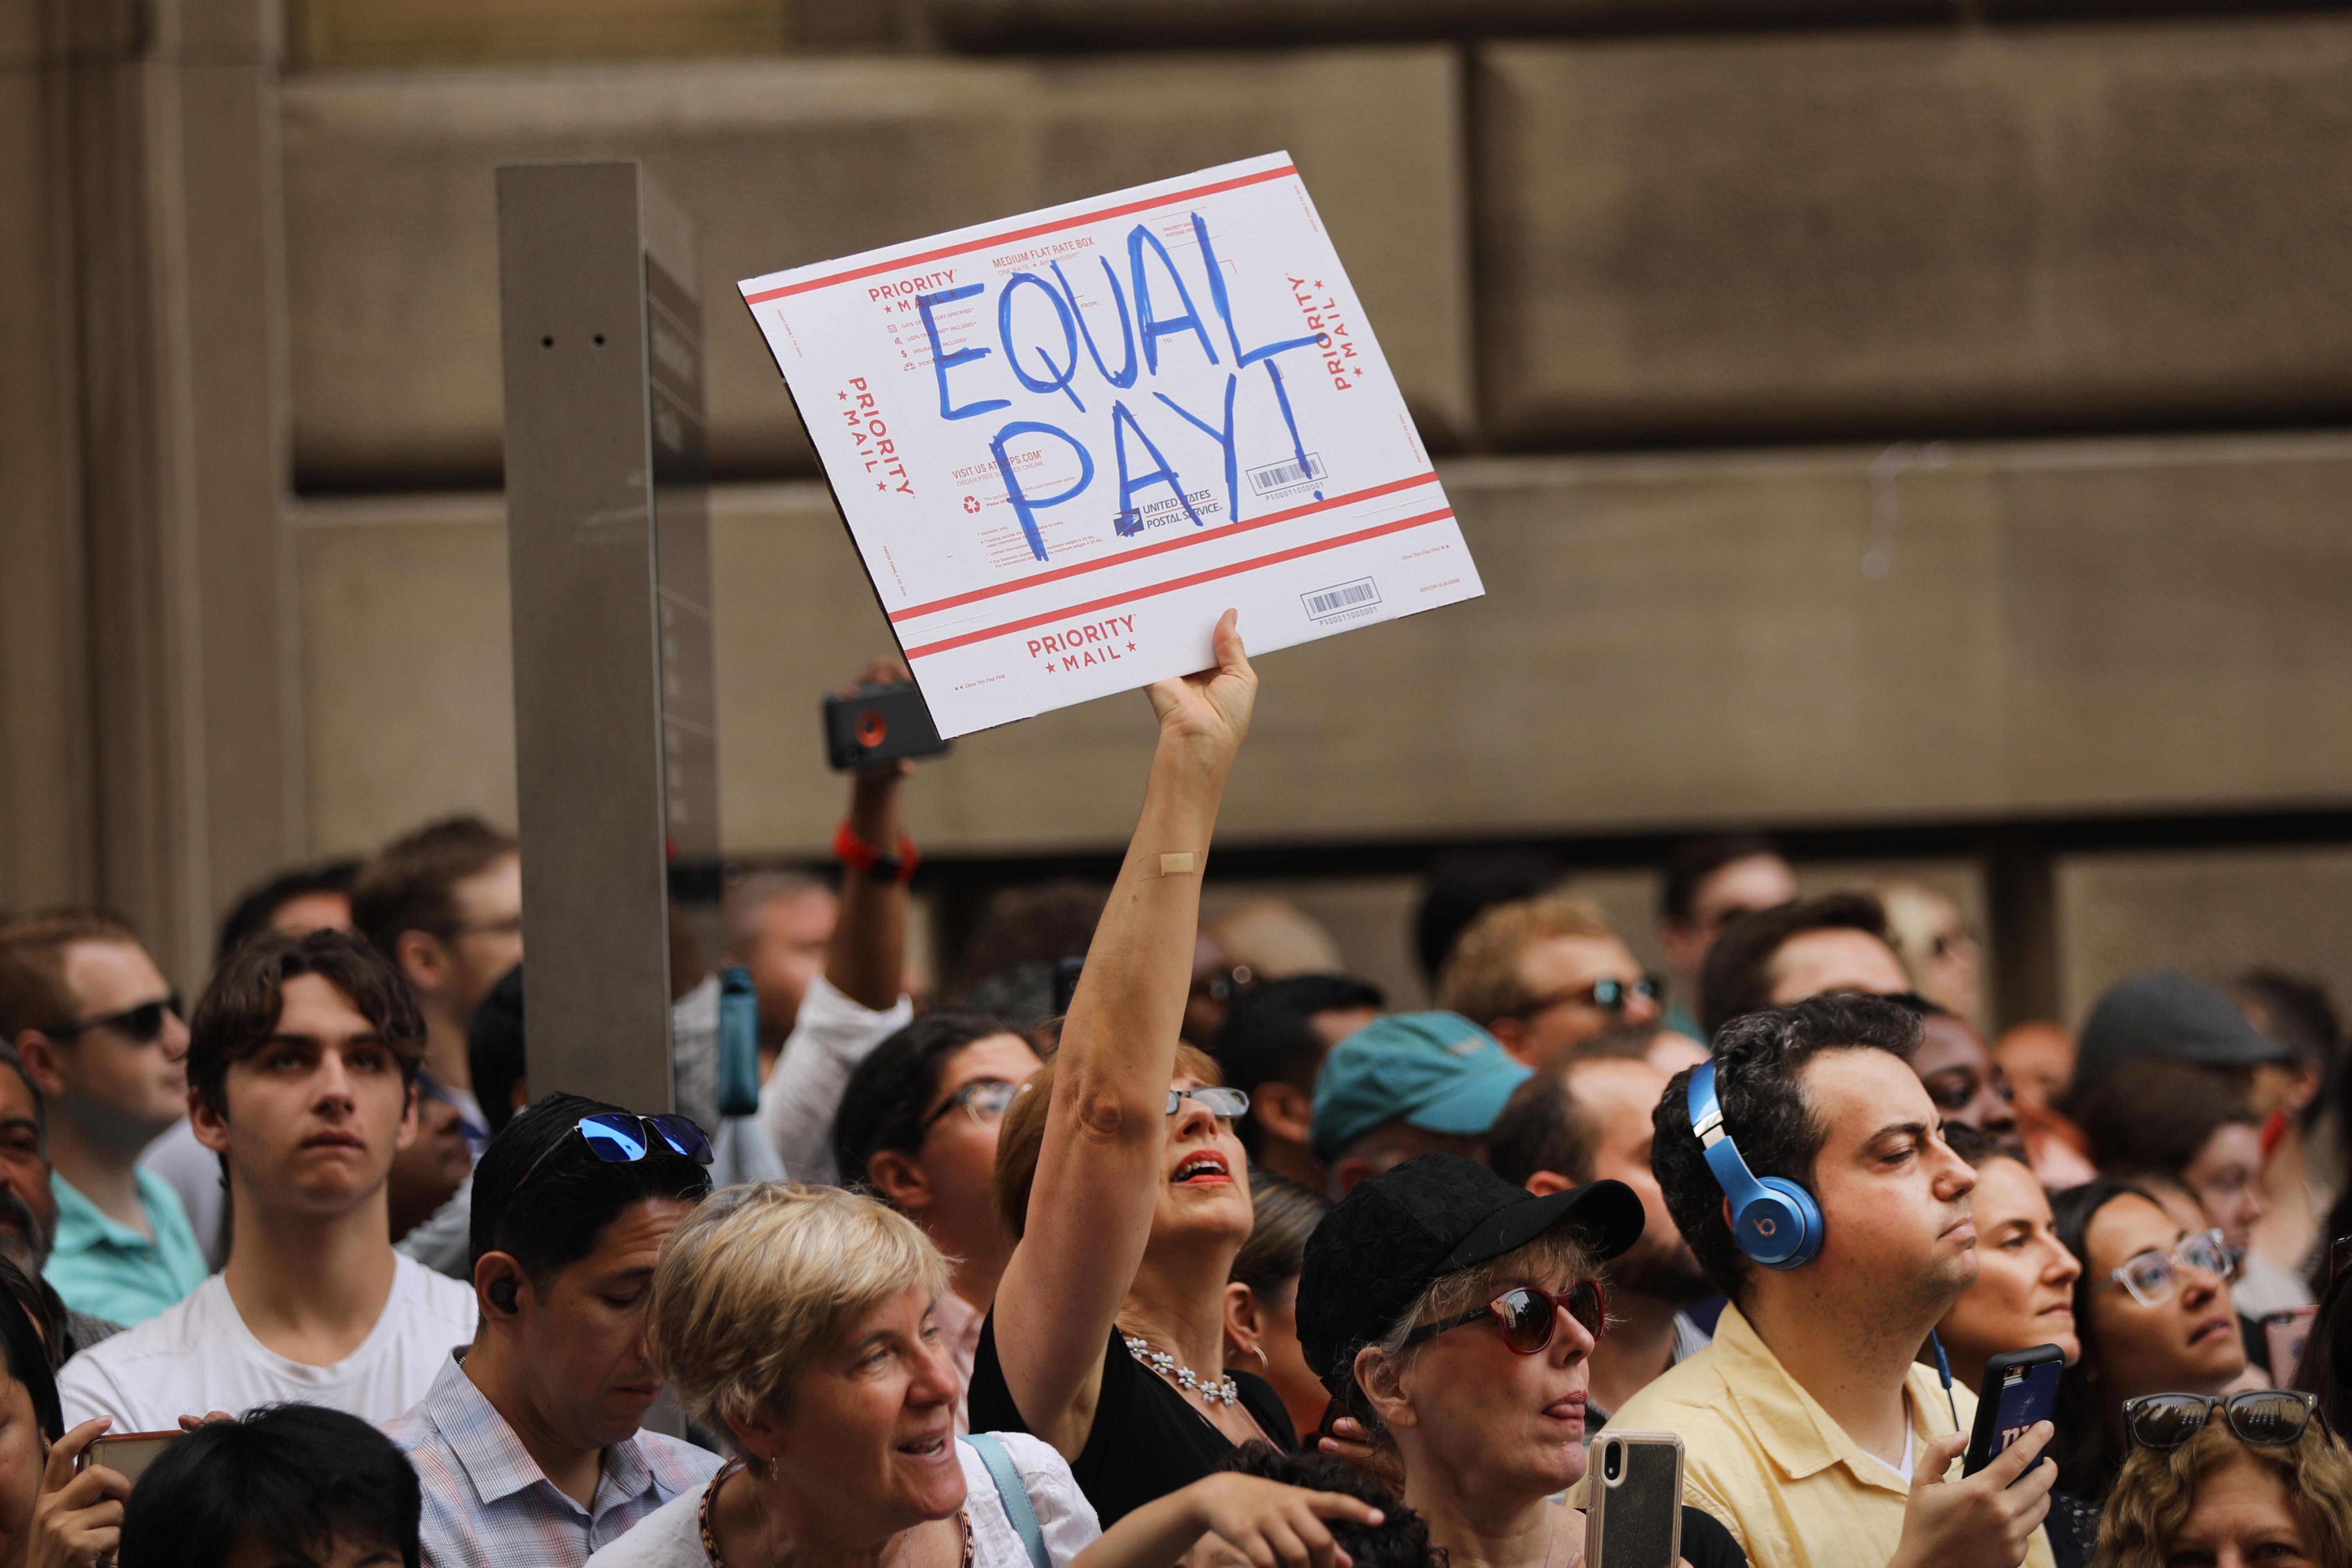 A woman holds a sign that says "Equal Pay" in a crowd of USWNT supporters.